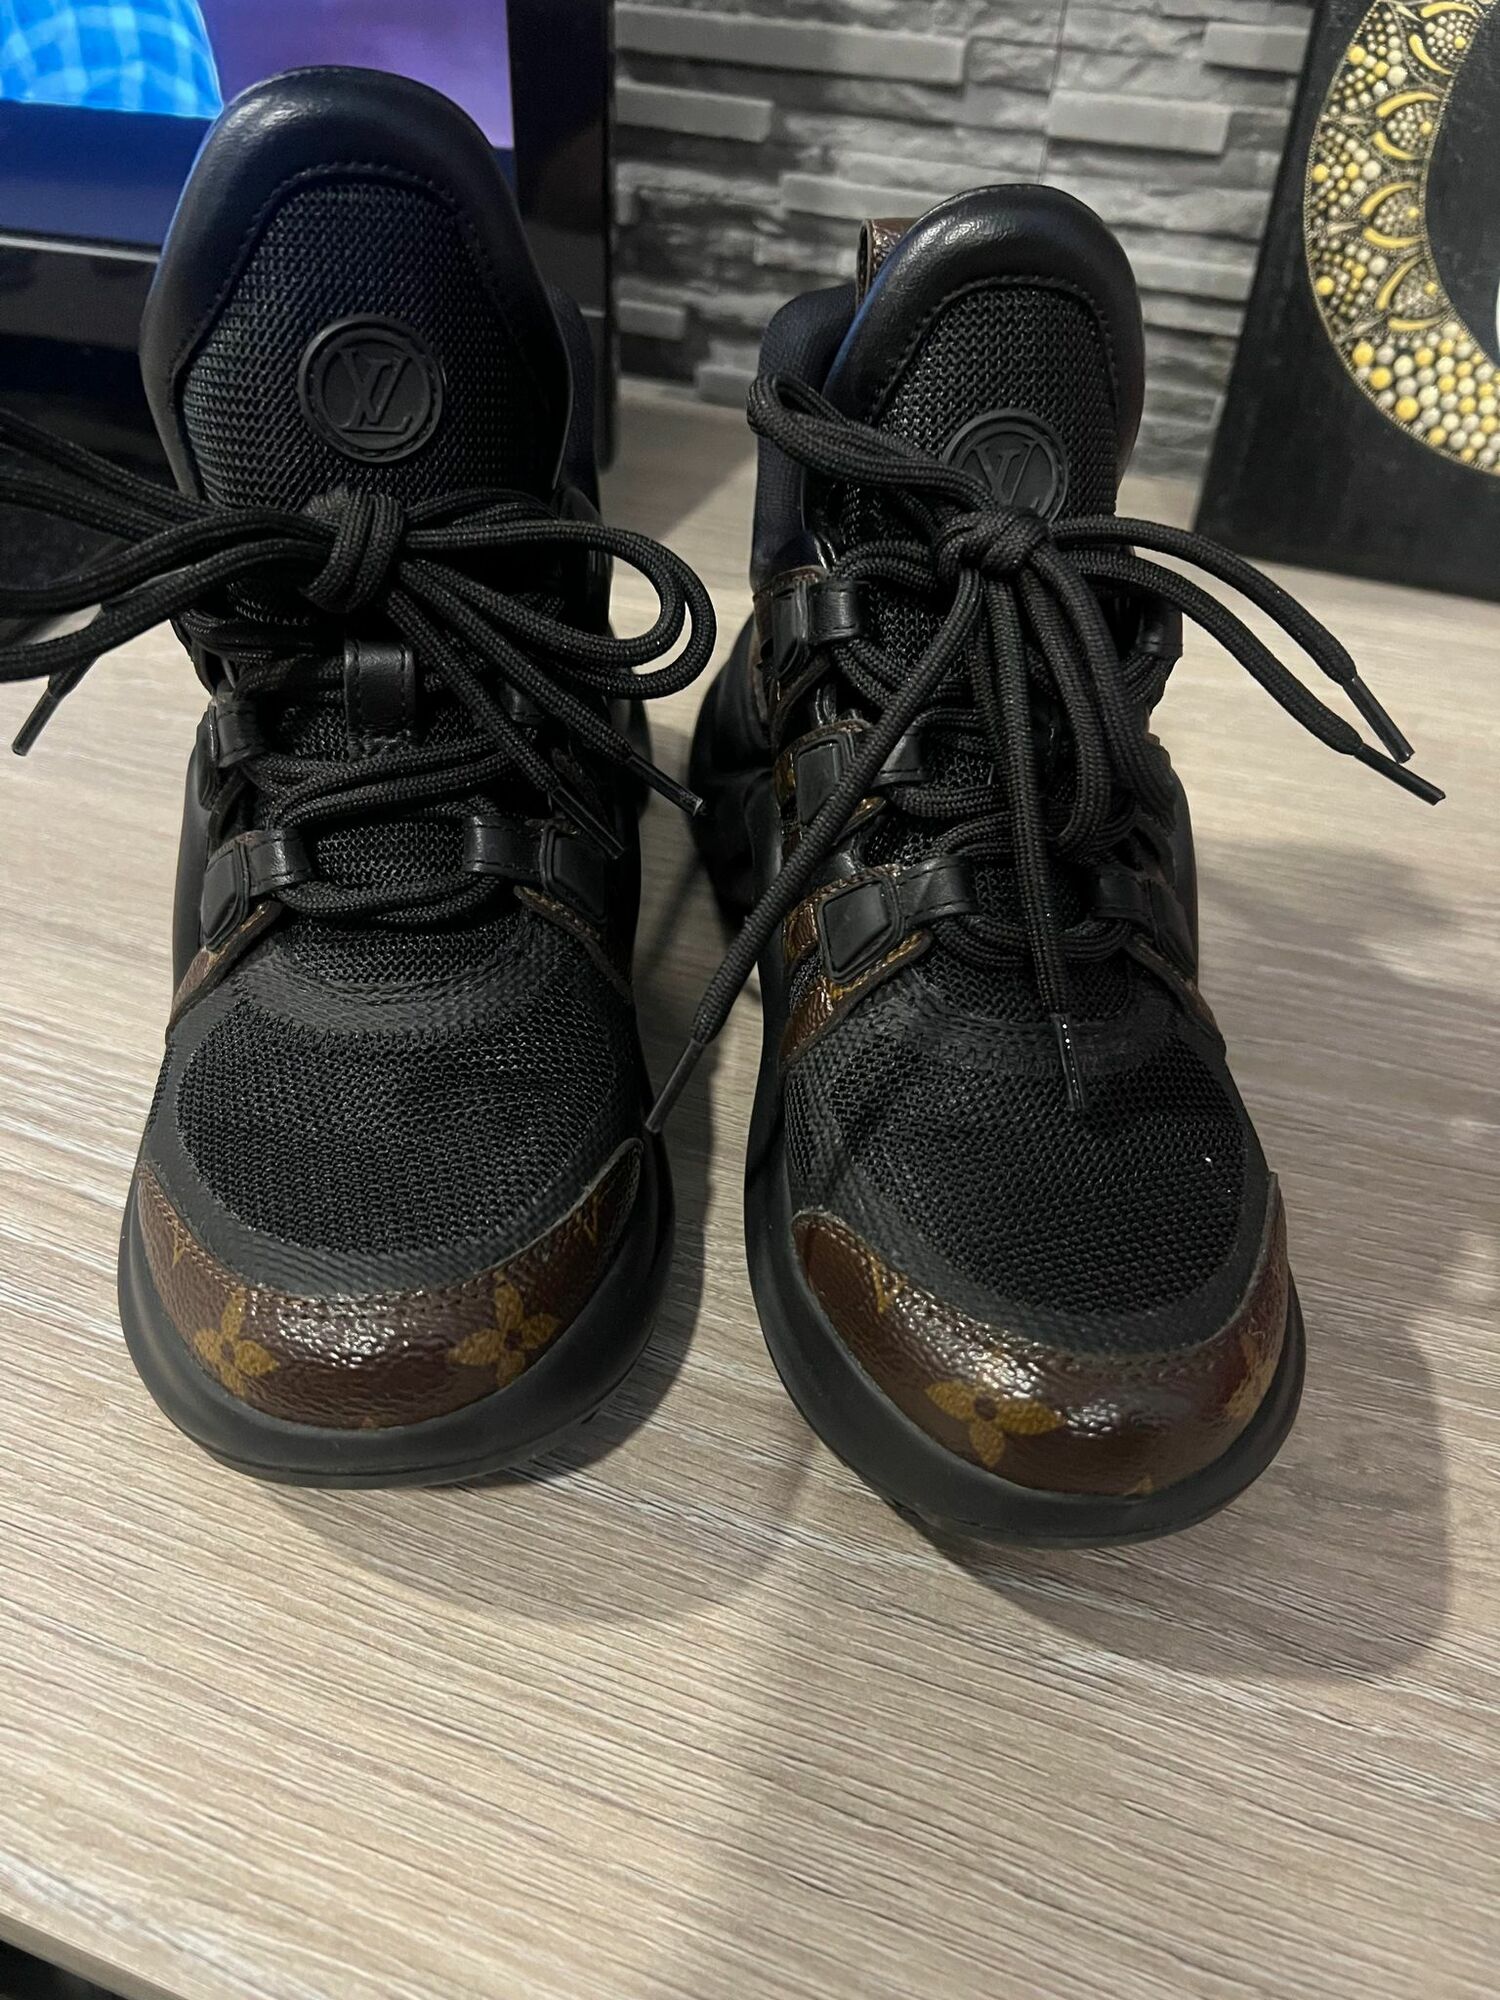 Louis Vuitton Archlight Sneakers Review